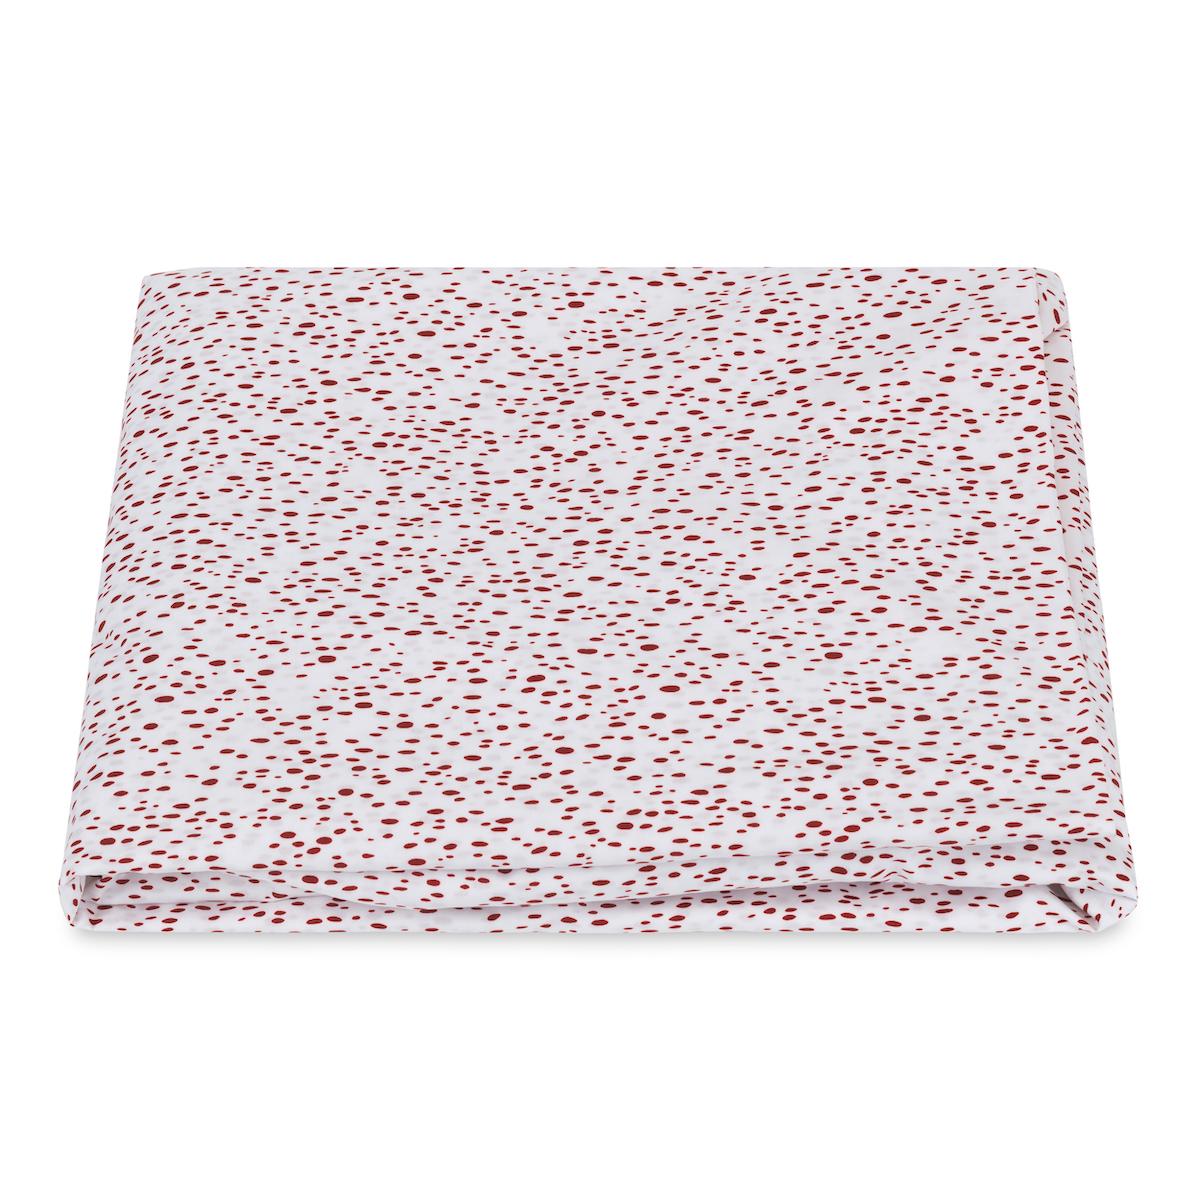 Celine Fitted Sheet_REDBERRY